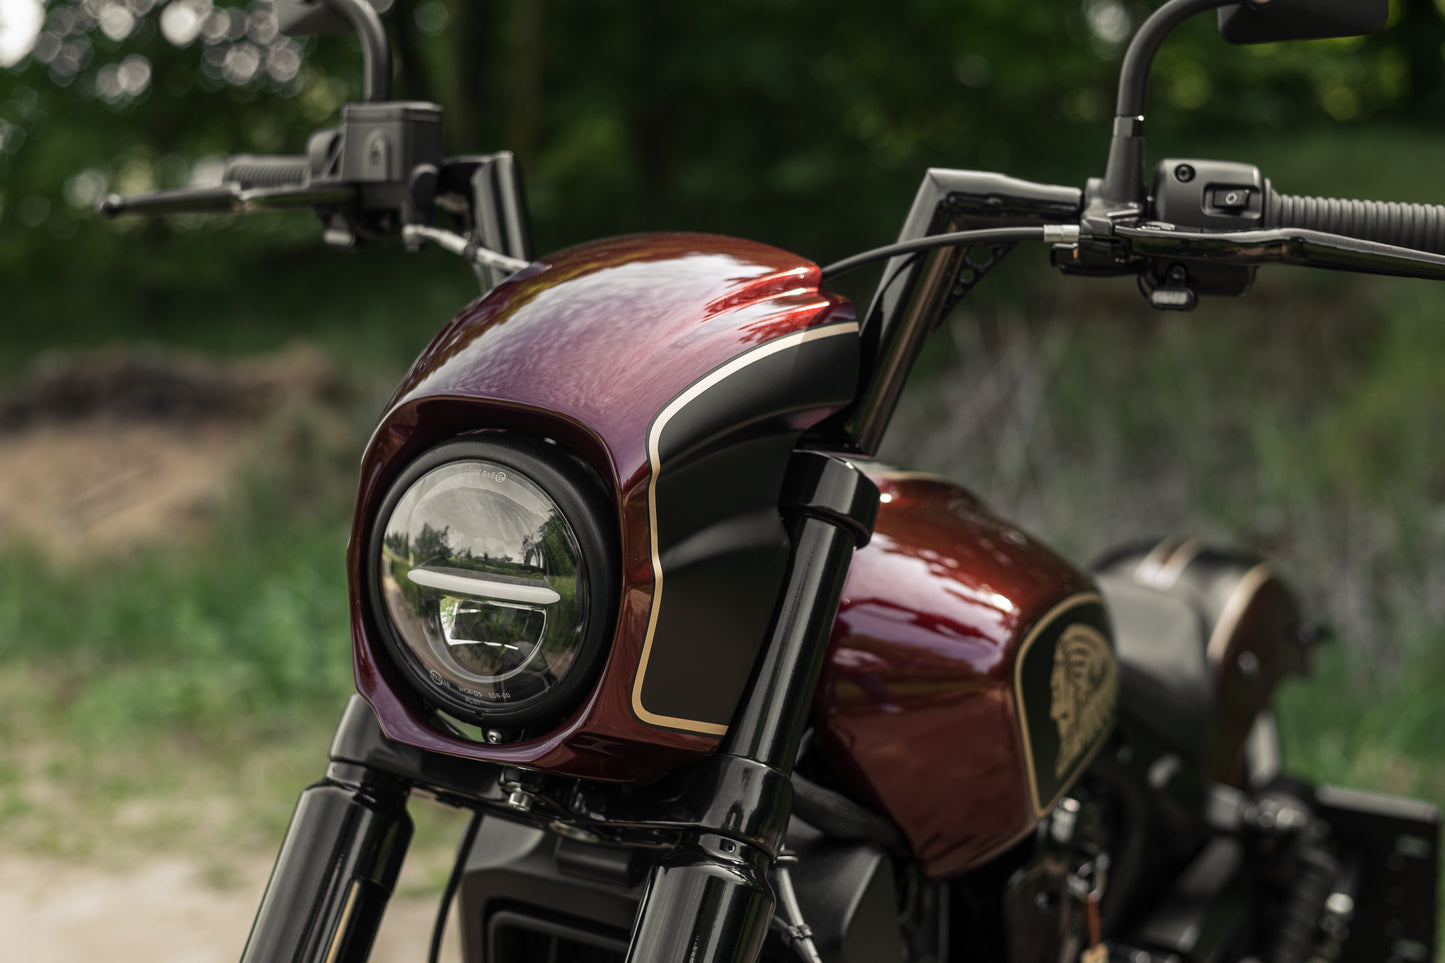 Zoomed Harley Davidson motorcycle with Killer Custom  "Tomahawk" series headlight fairing from the front green blurry background